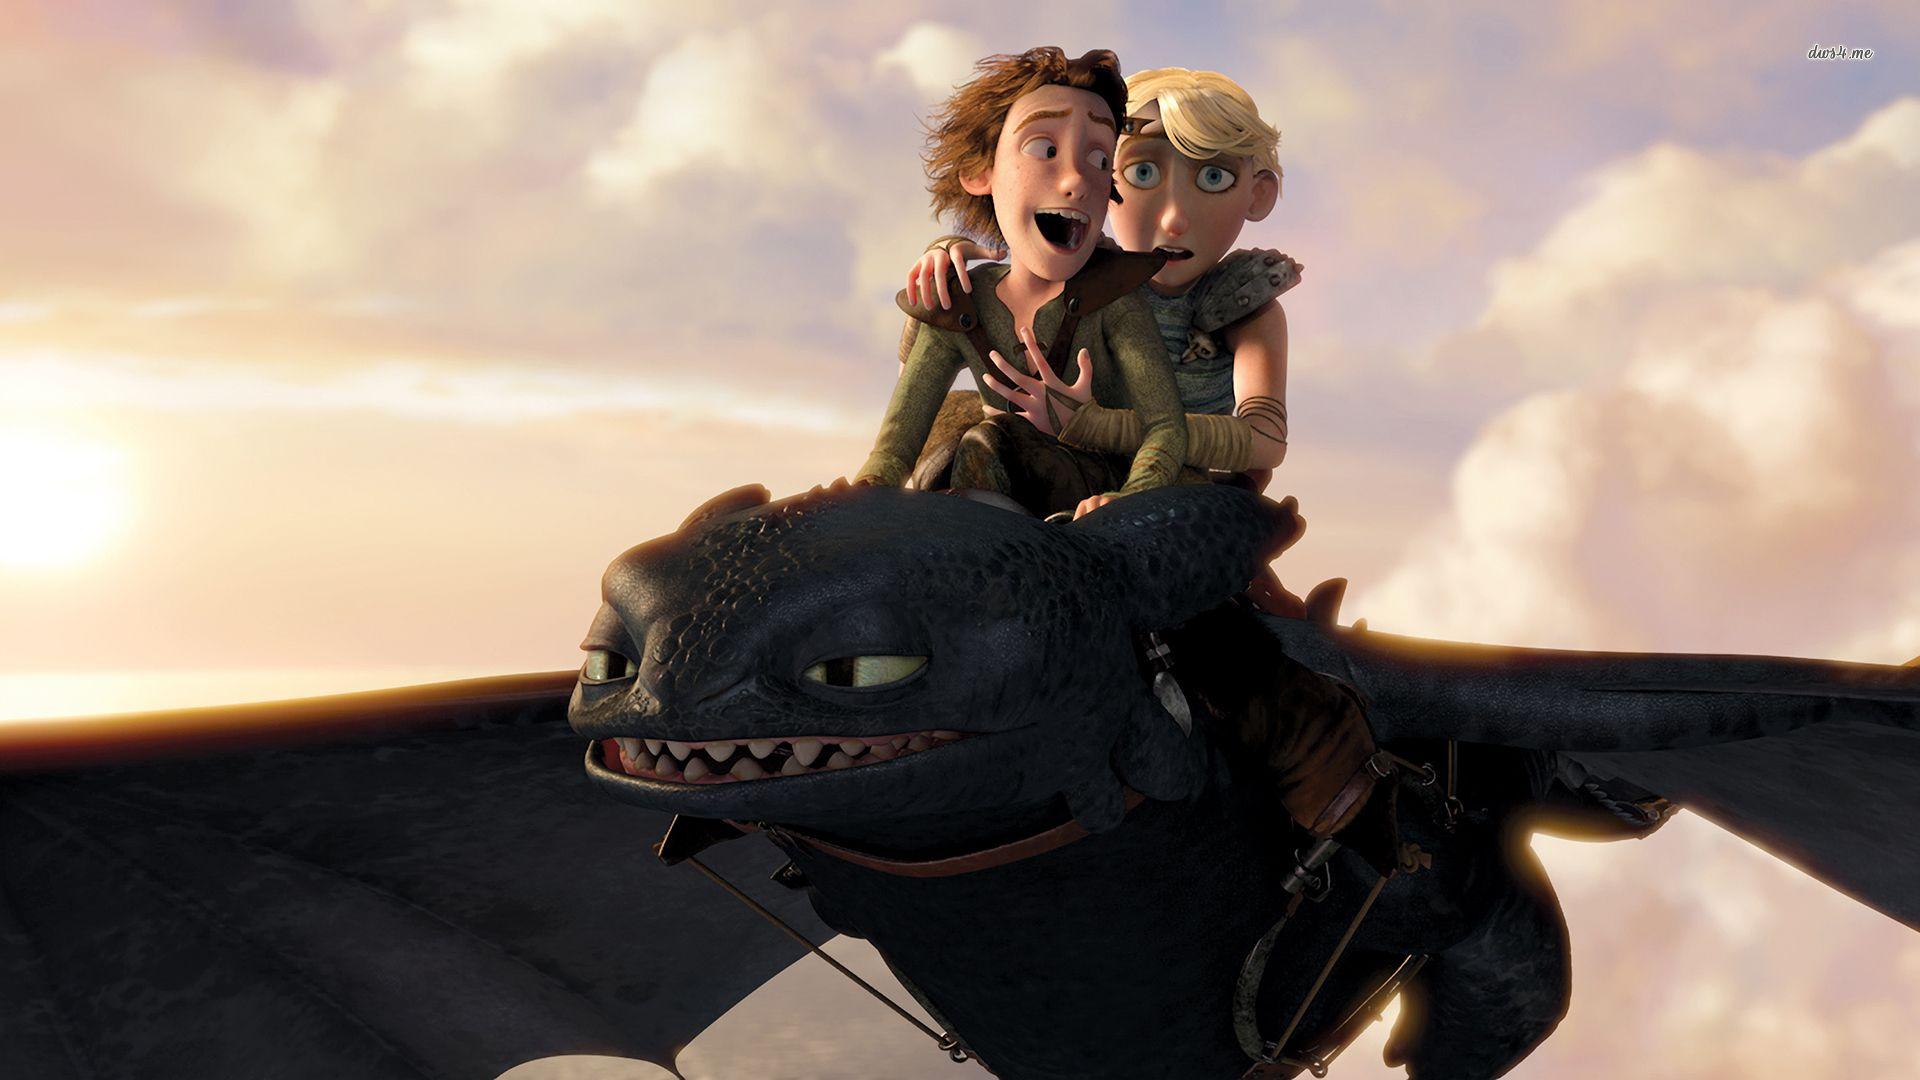 Hiccup and Astrid on Toothless to Train Your Dragon wallpaper